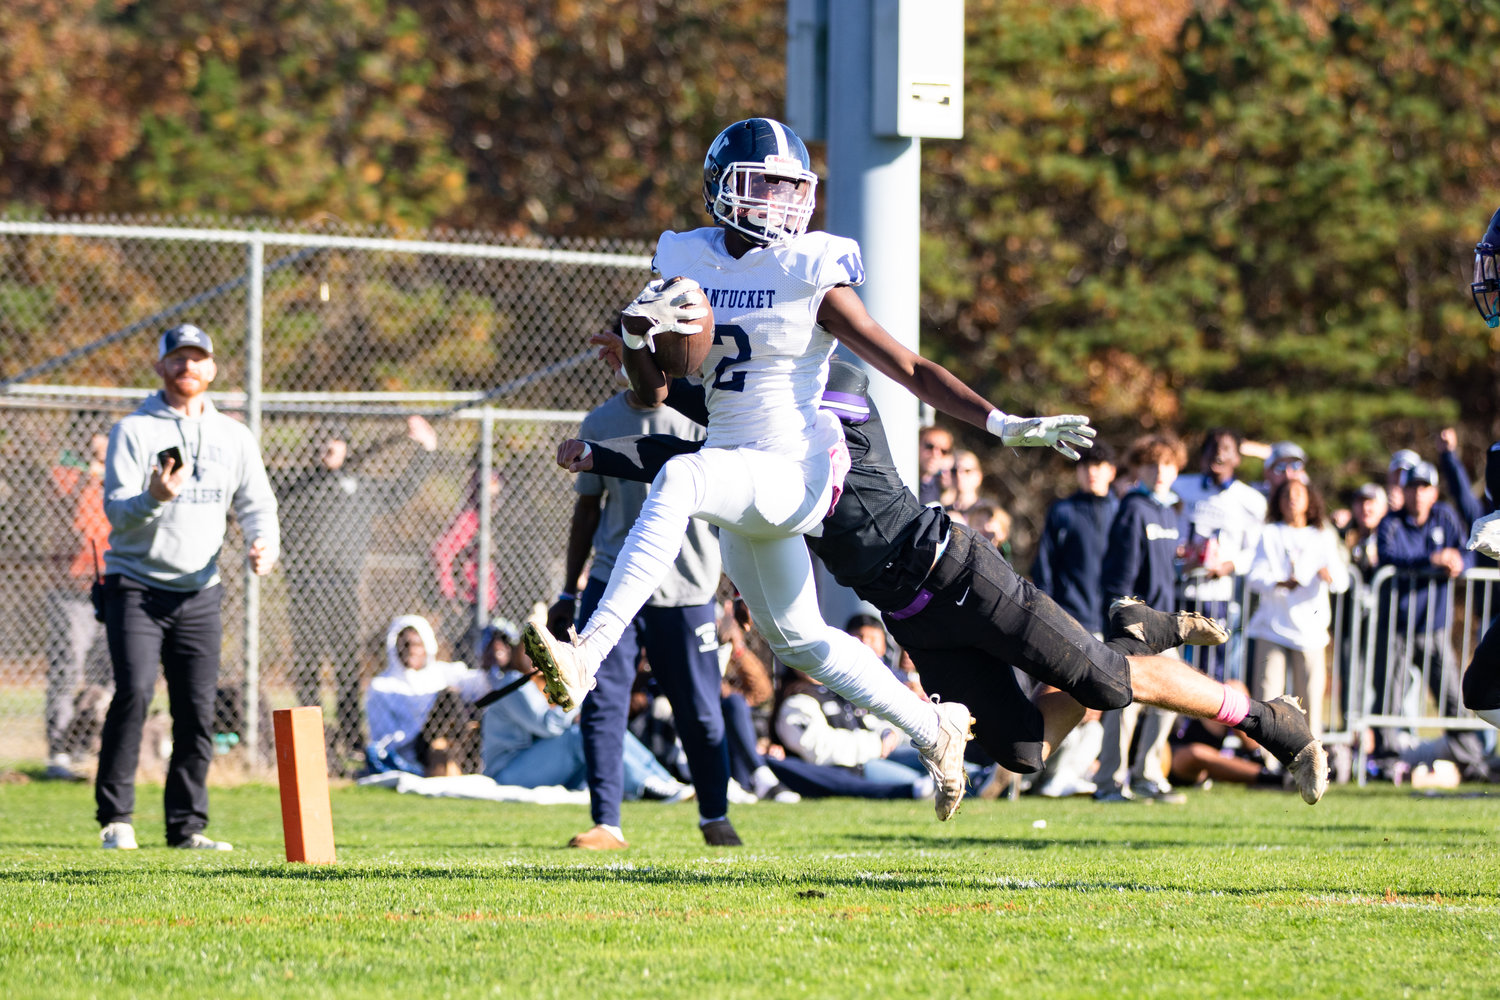 Jayquan Francis high steps into the end zone for a first touchdown against Martha's Vineyard.